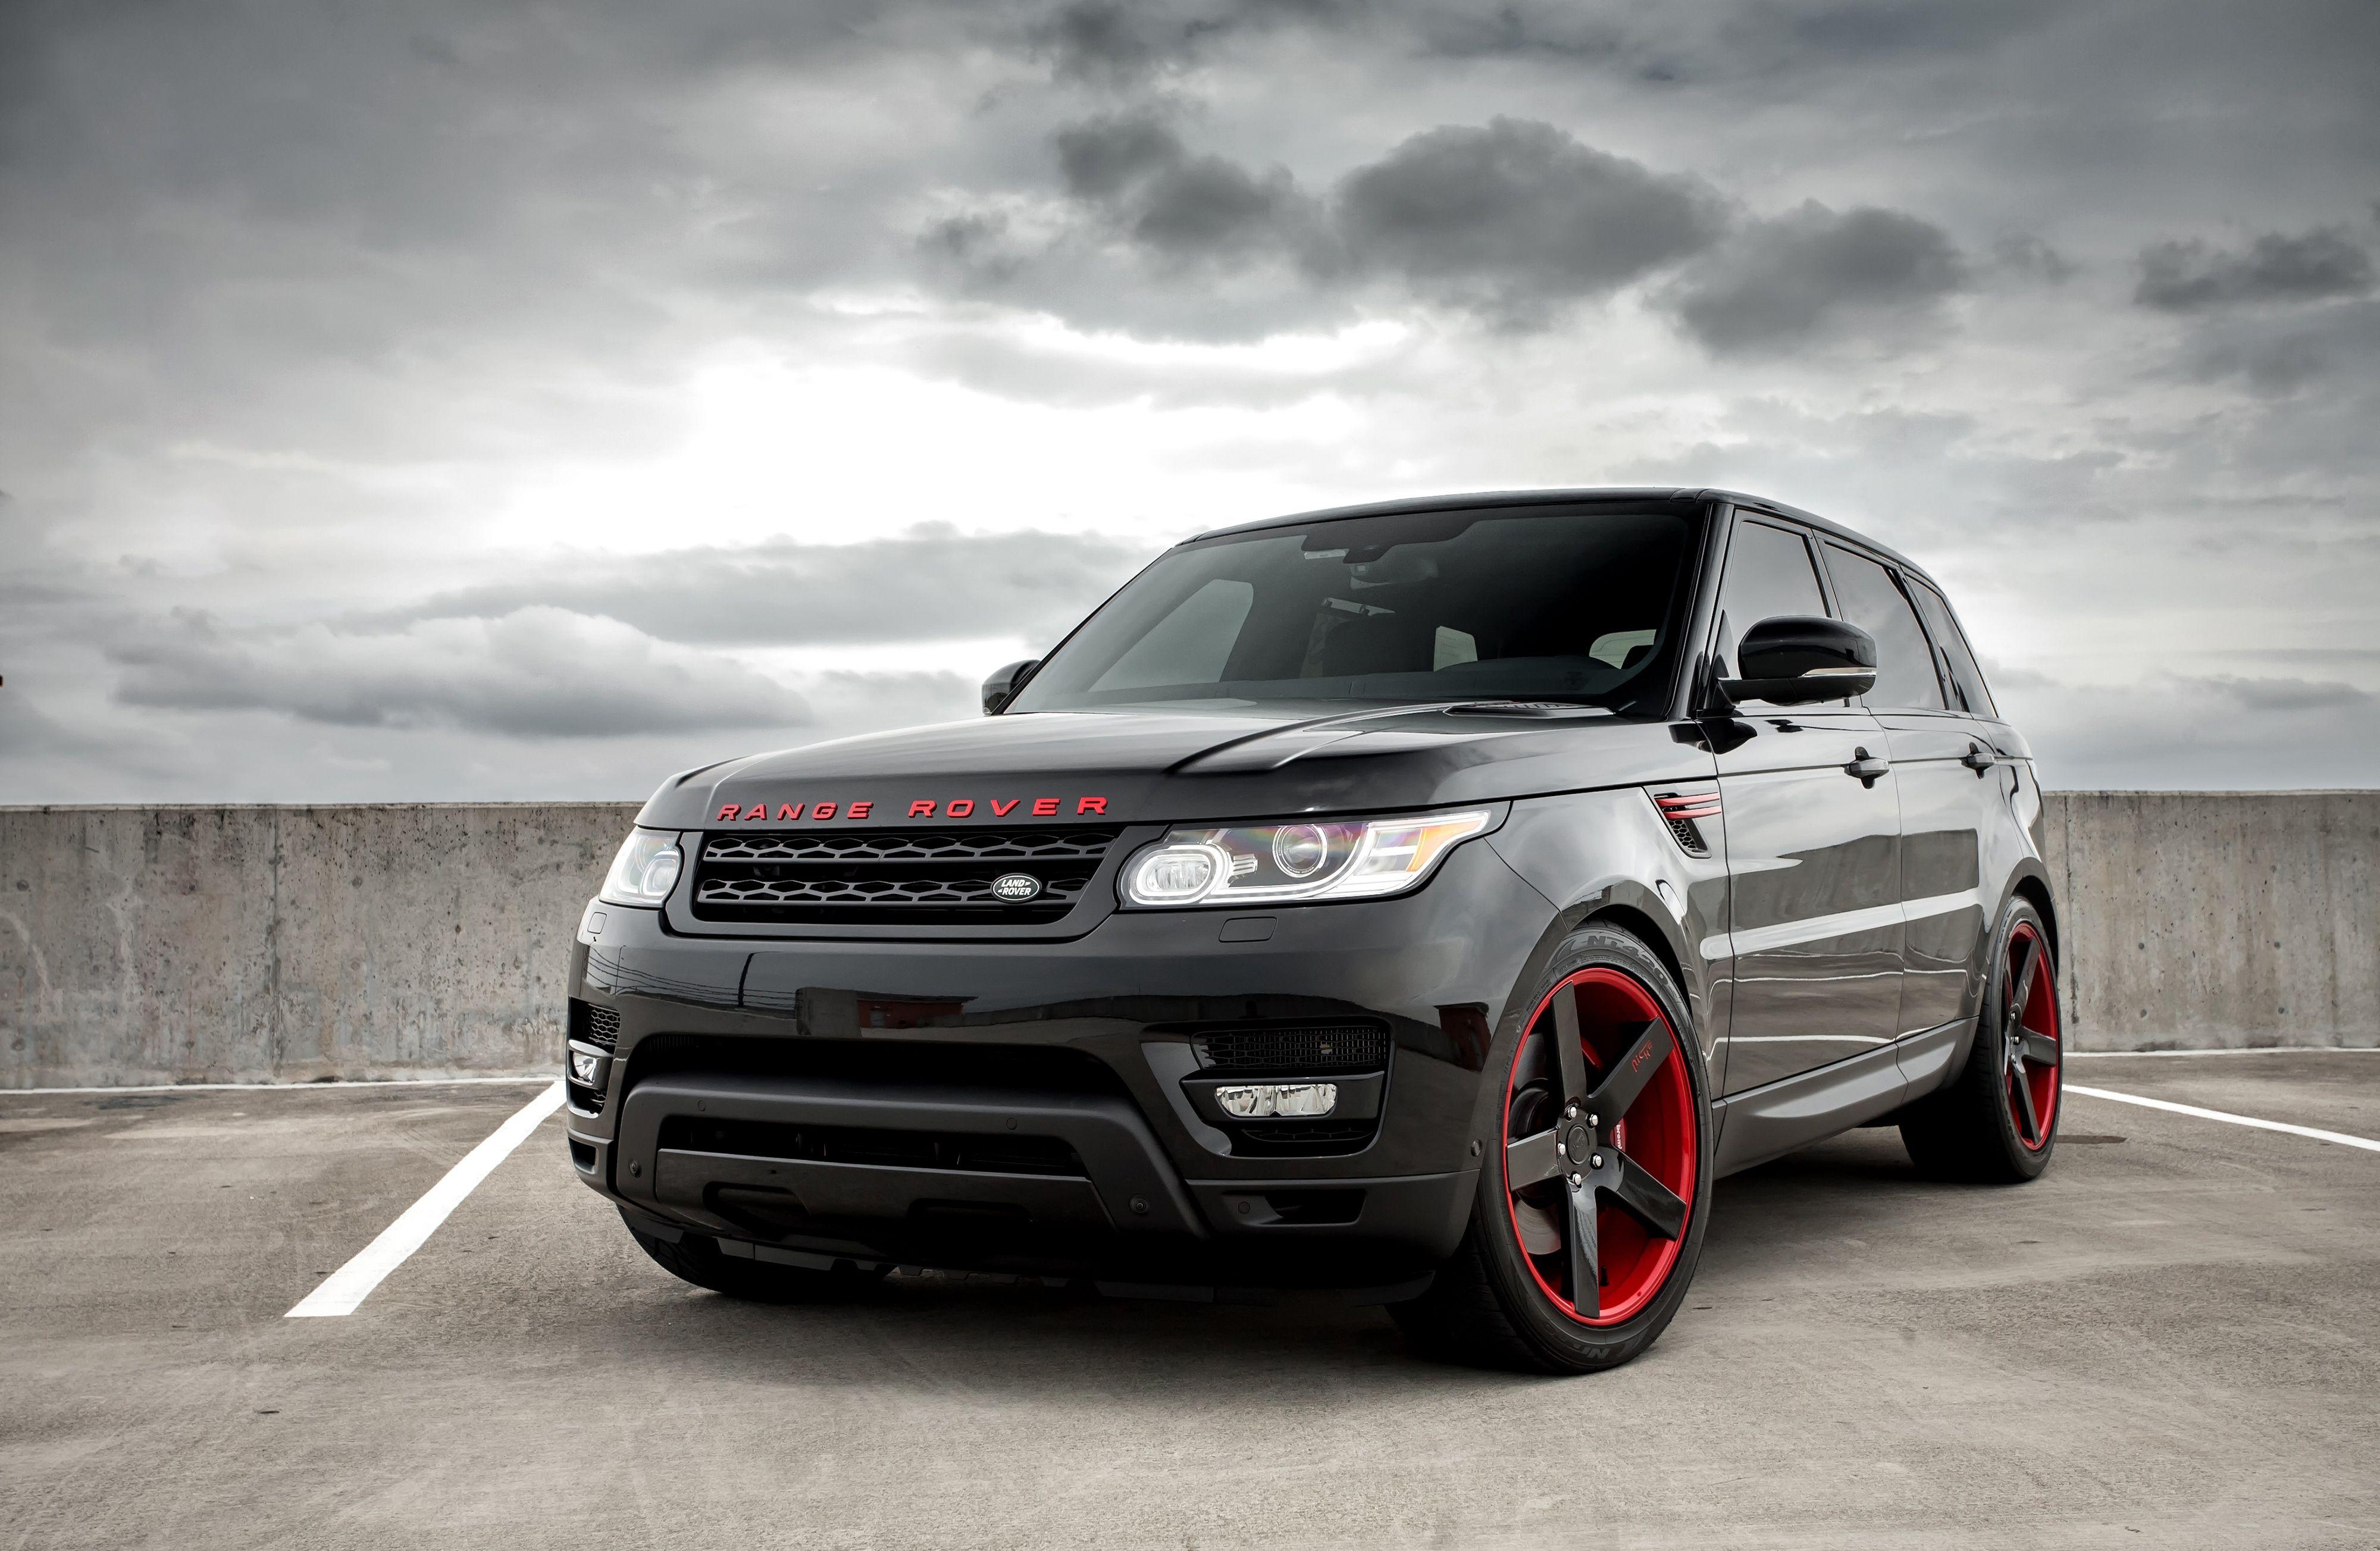 Range Rover HD Wallpaper and Background Image